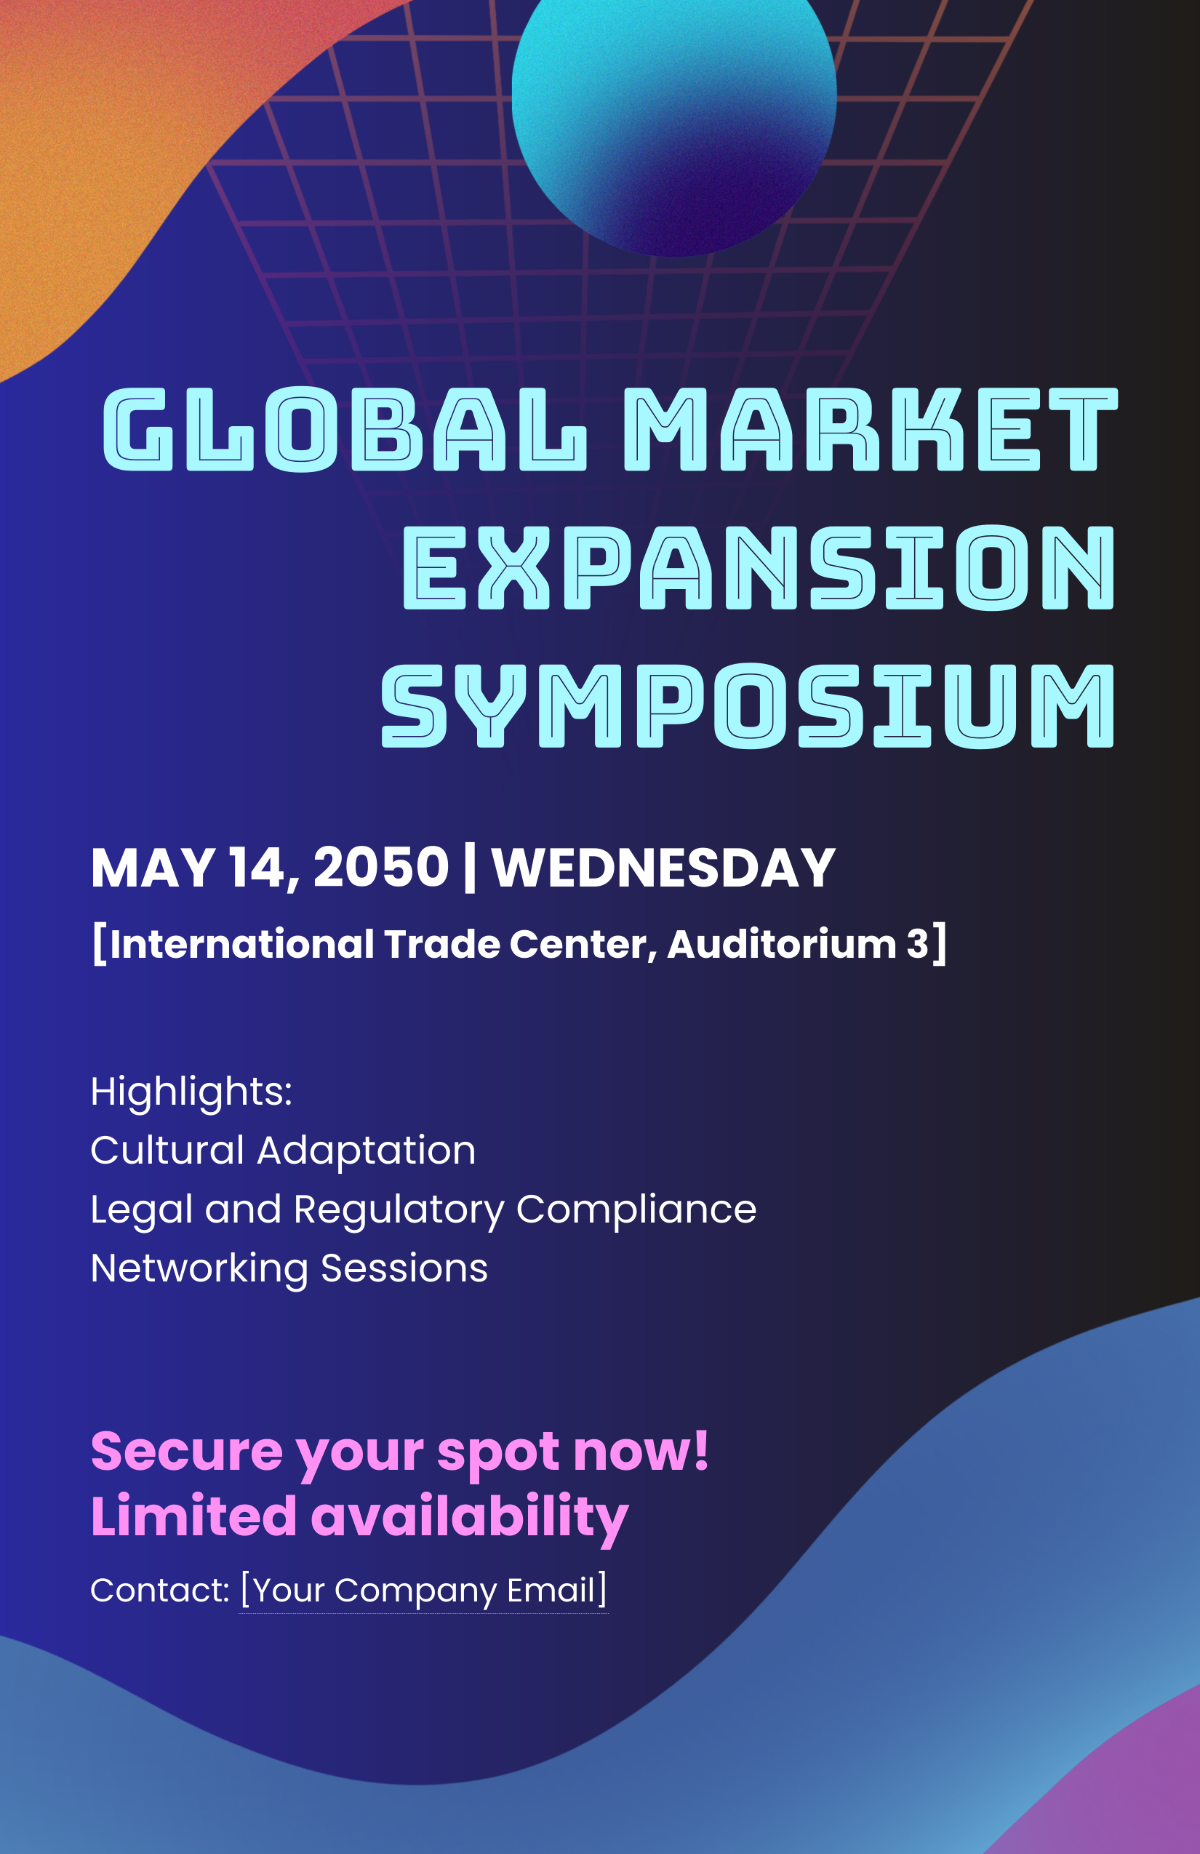 Global Market Expansion Symposium Poster Template